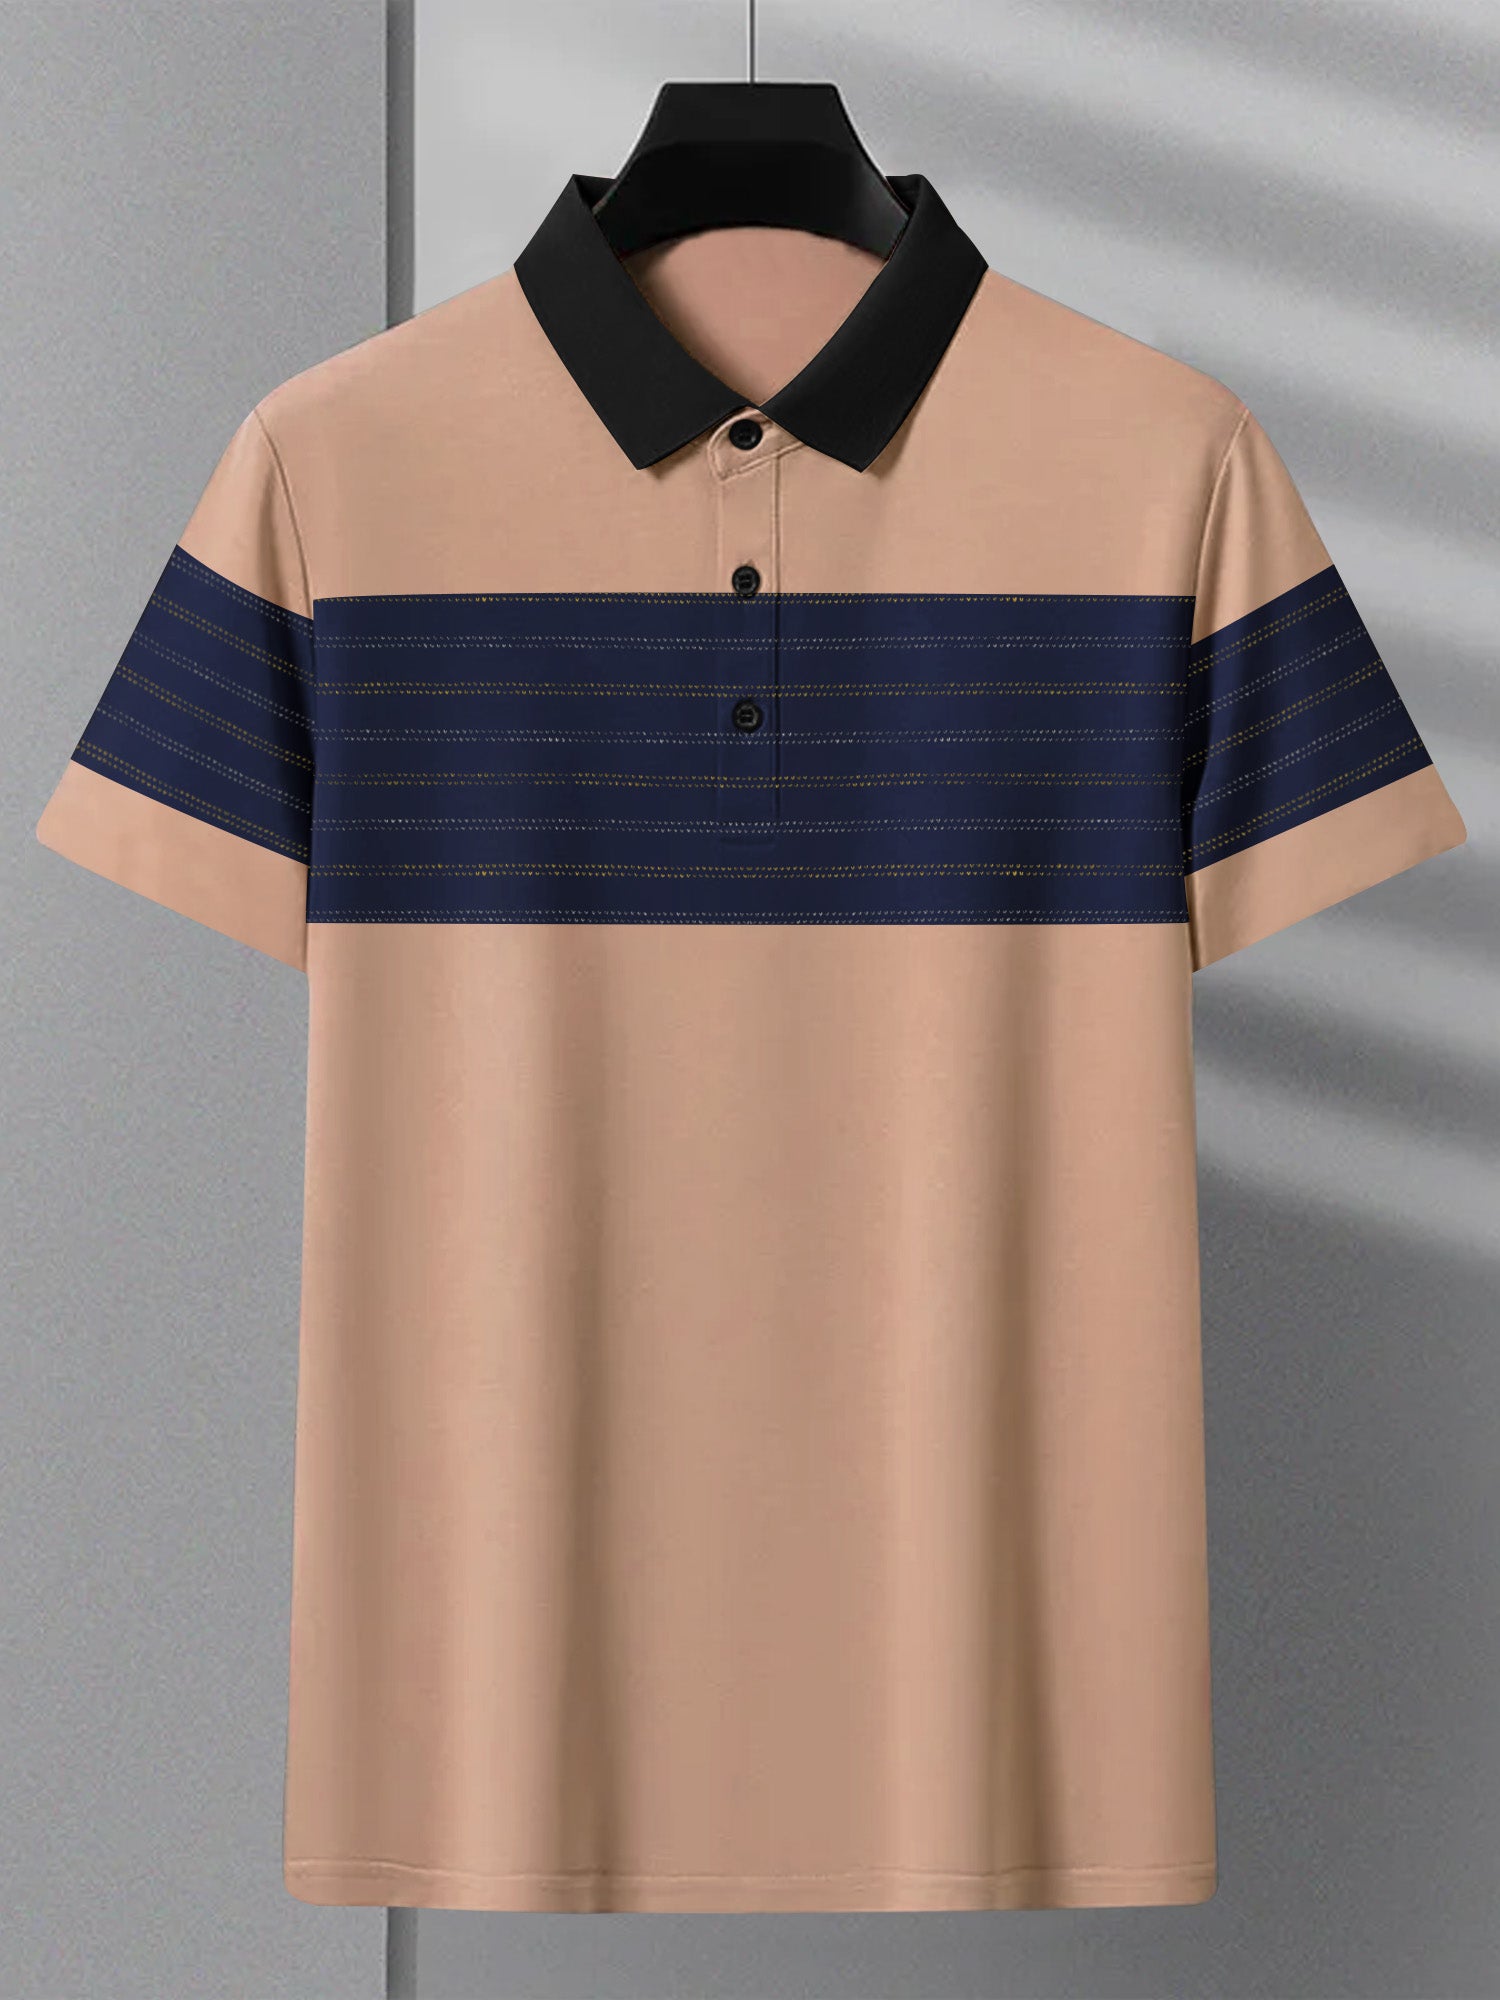 NXT Summer Polo Shirt For Men-Light Orange with Navy Panel-BE683/BR12936